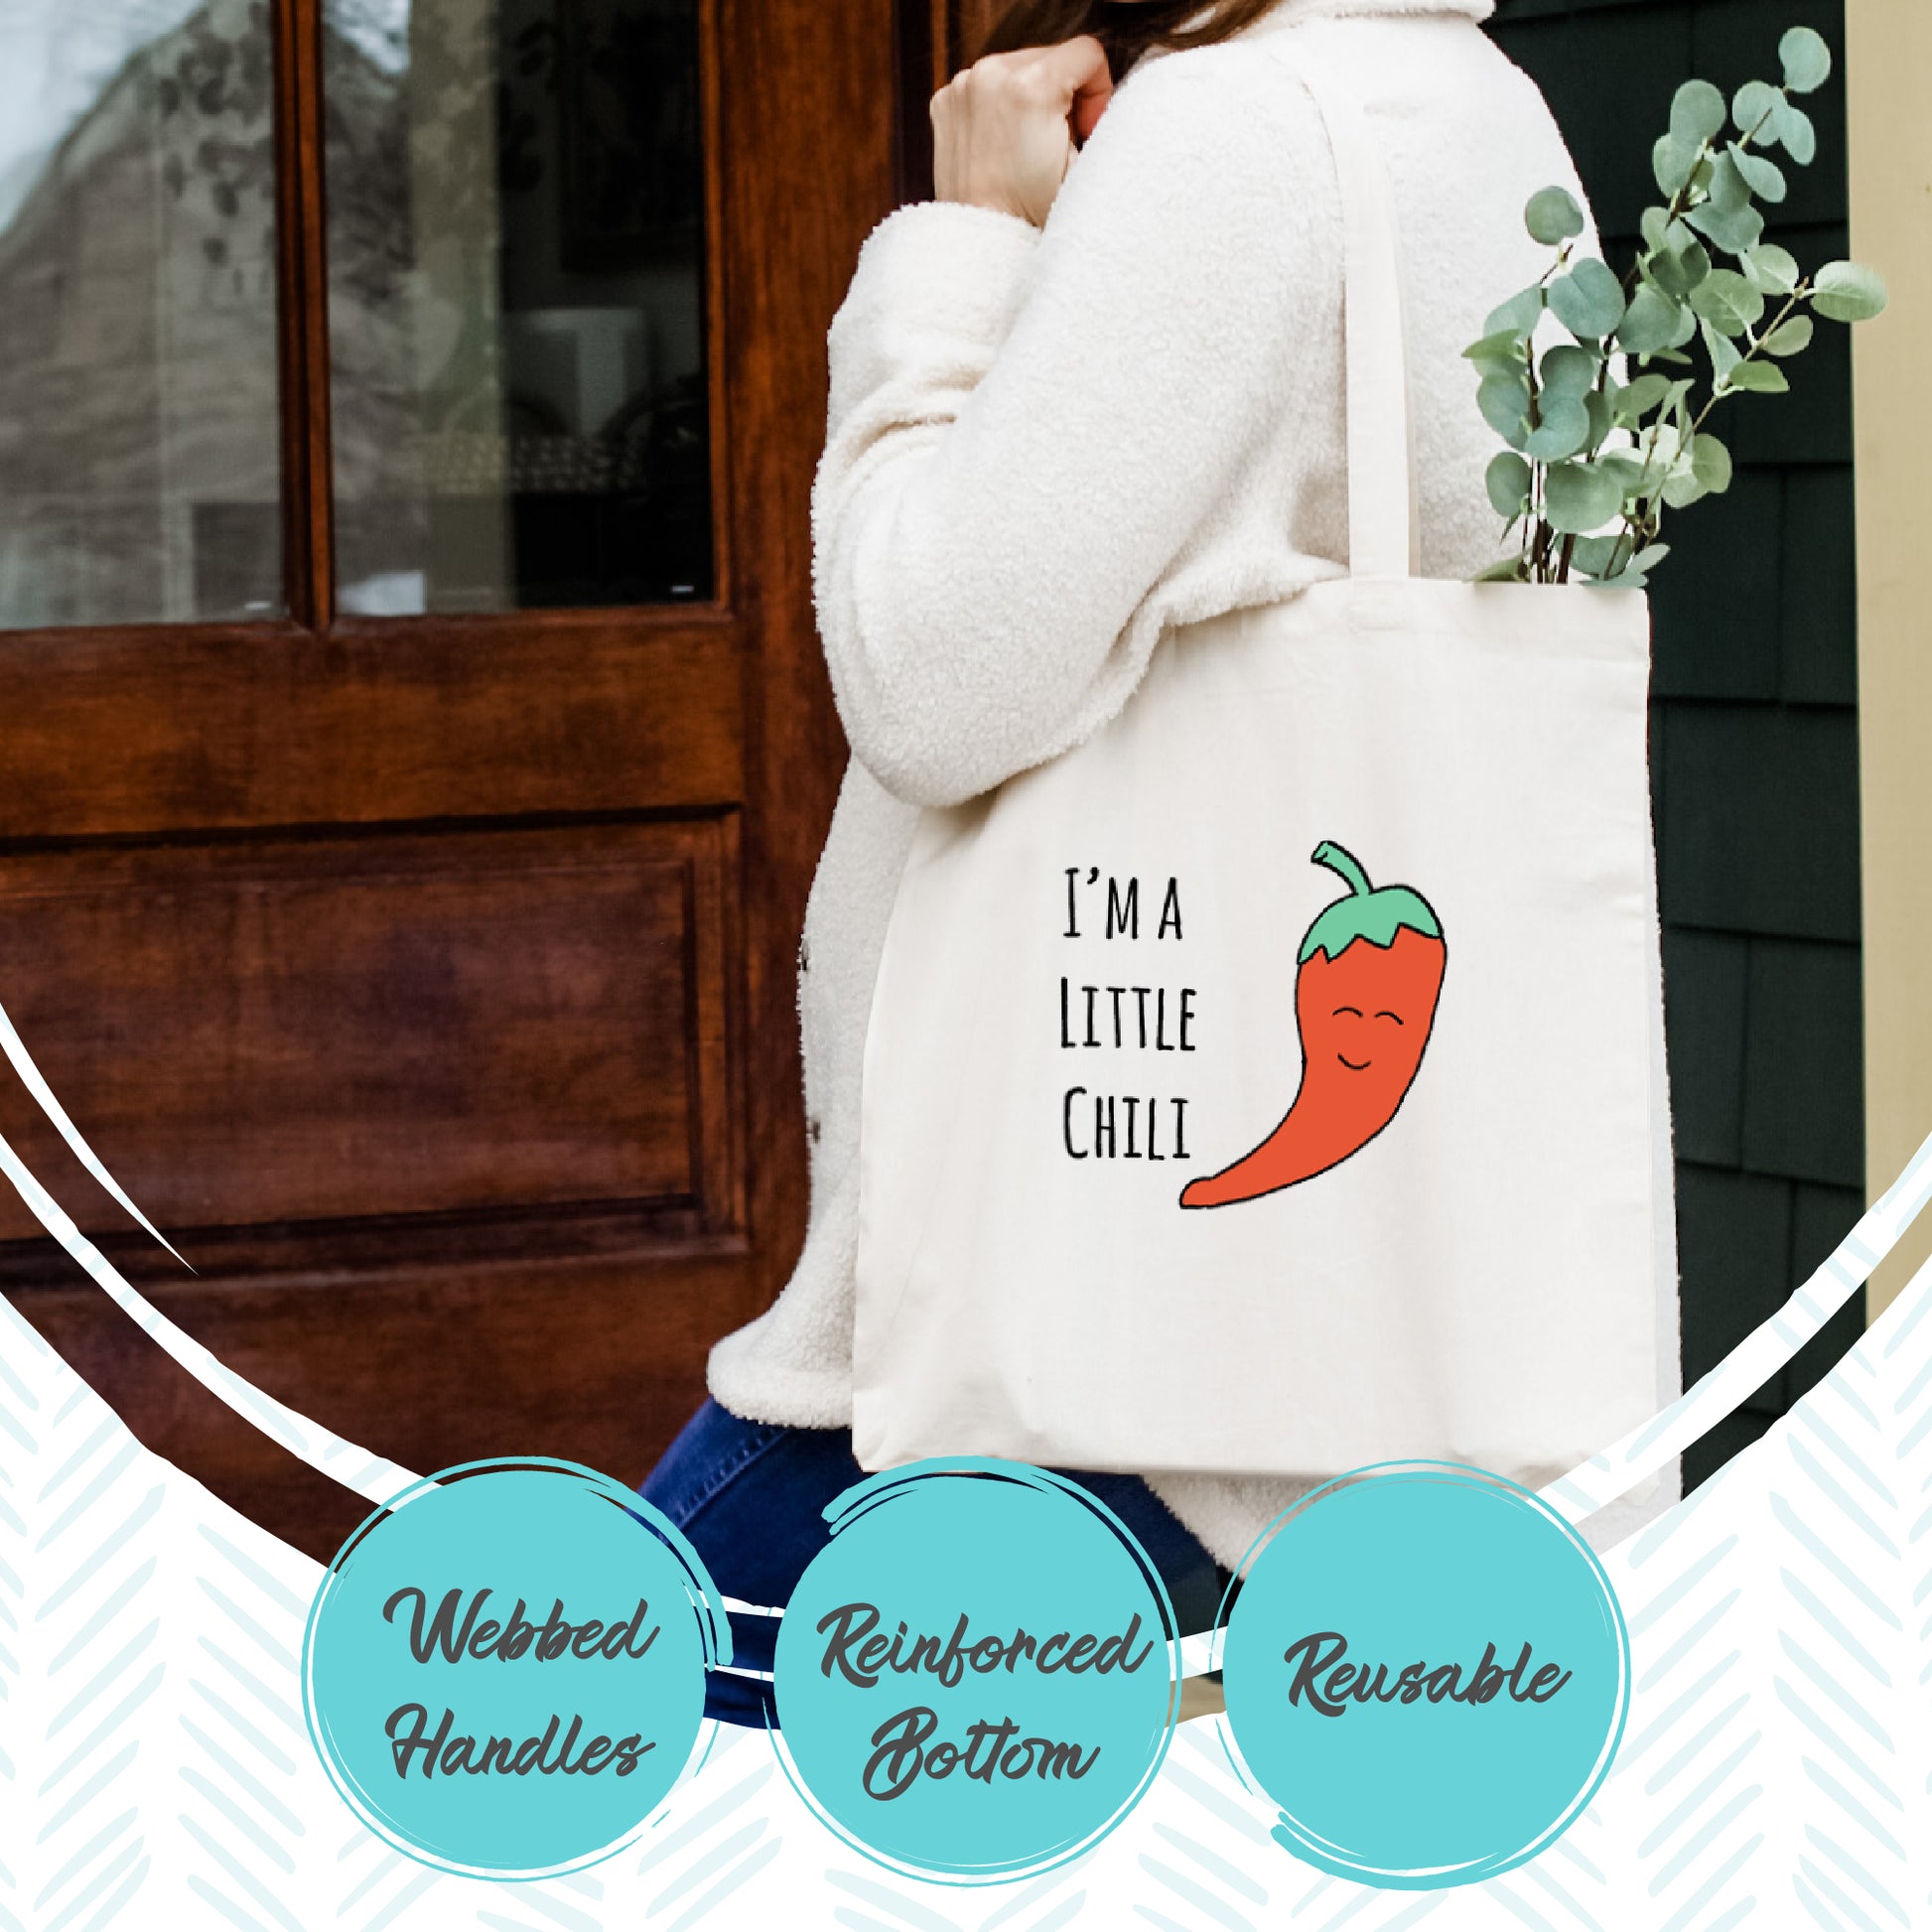 I'm A Little Chili - Full Color Tote - MoonlightMakers